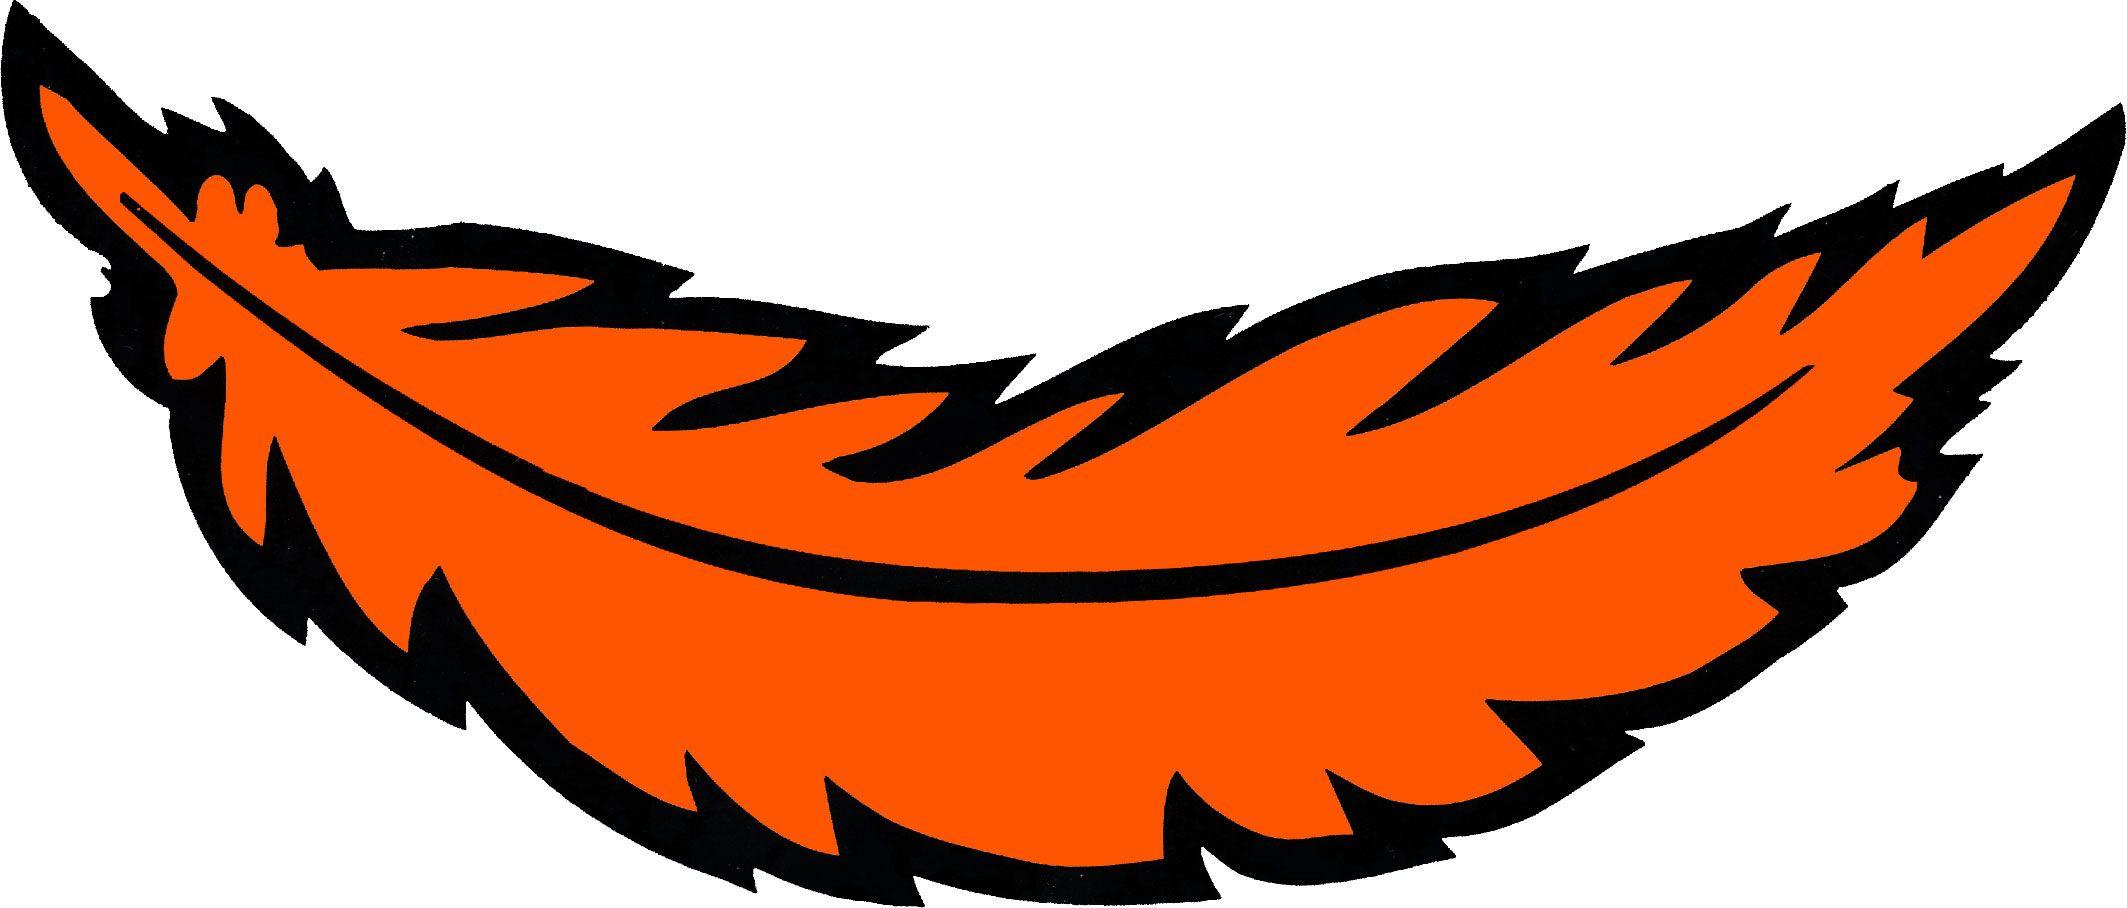 Indian Feather Logo - Roseburg High School Offical Graphics